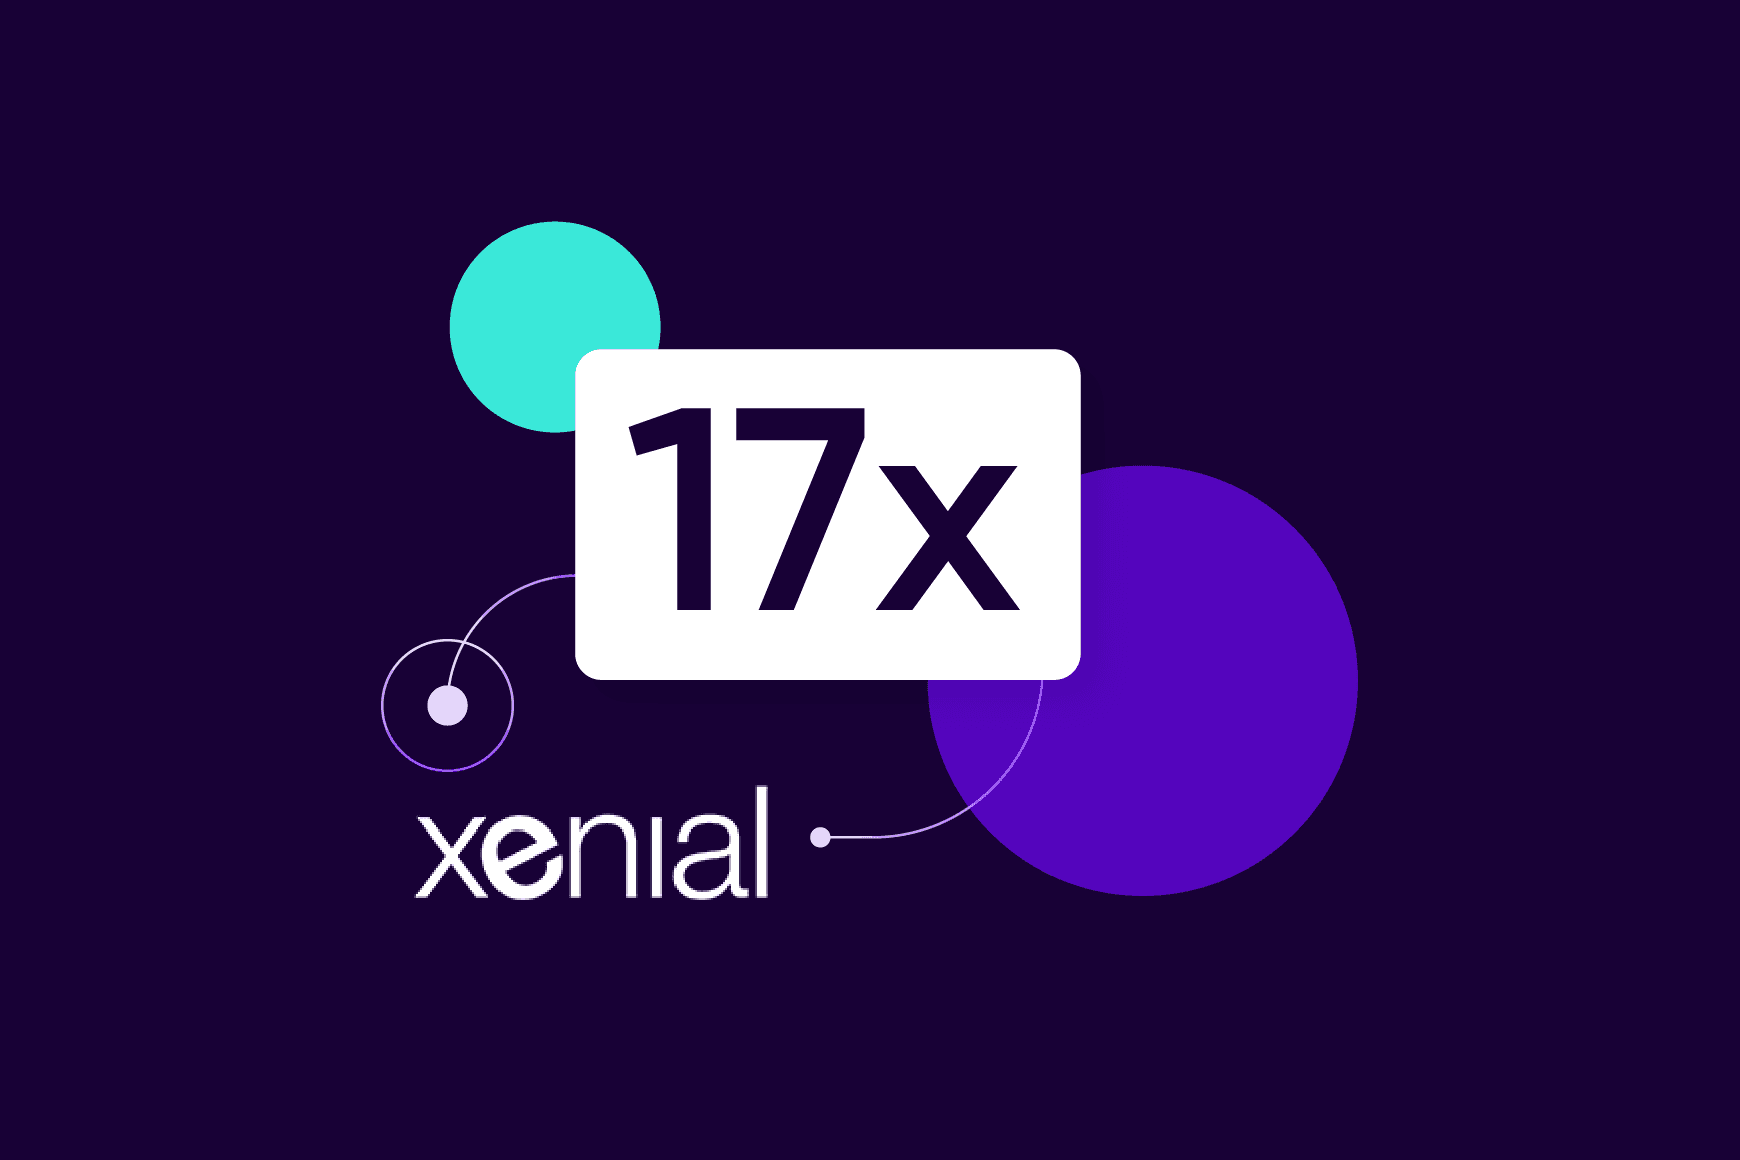 Xenial increased first call resolution by 17x